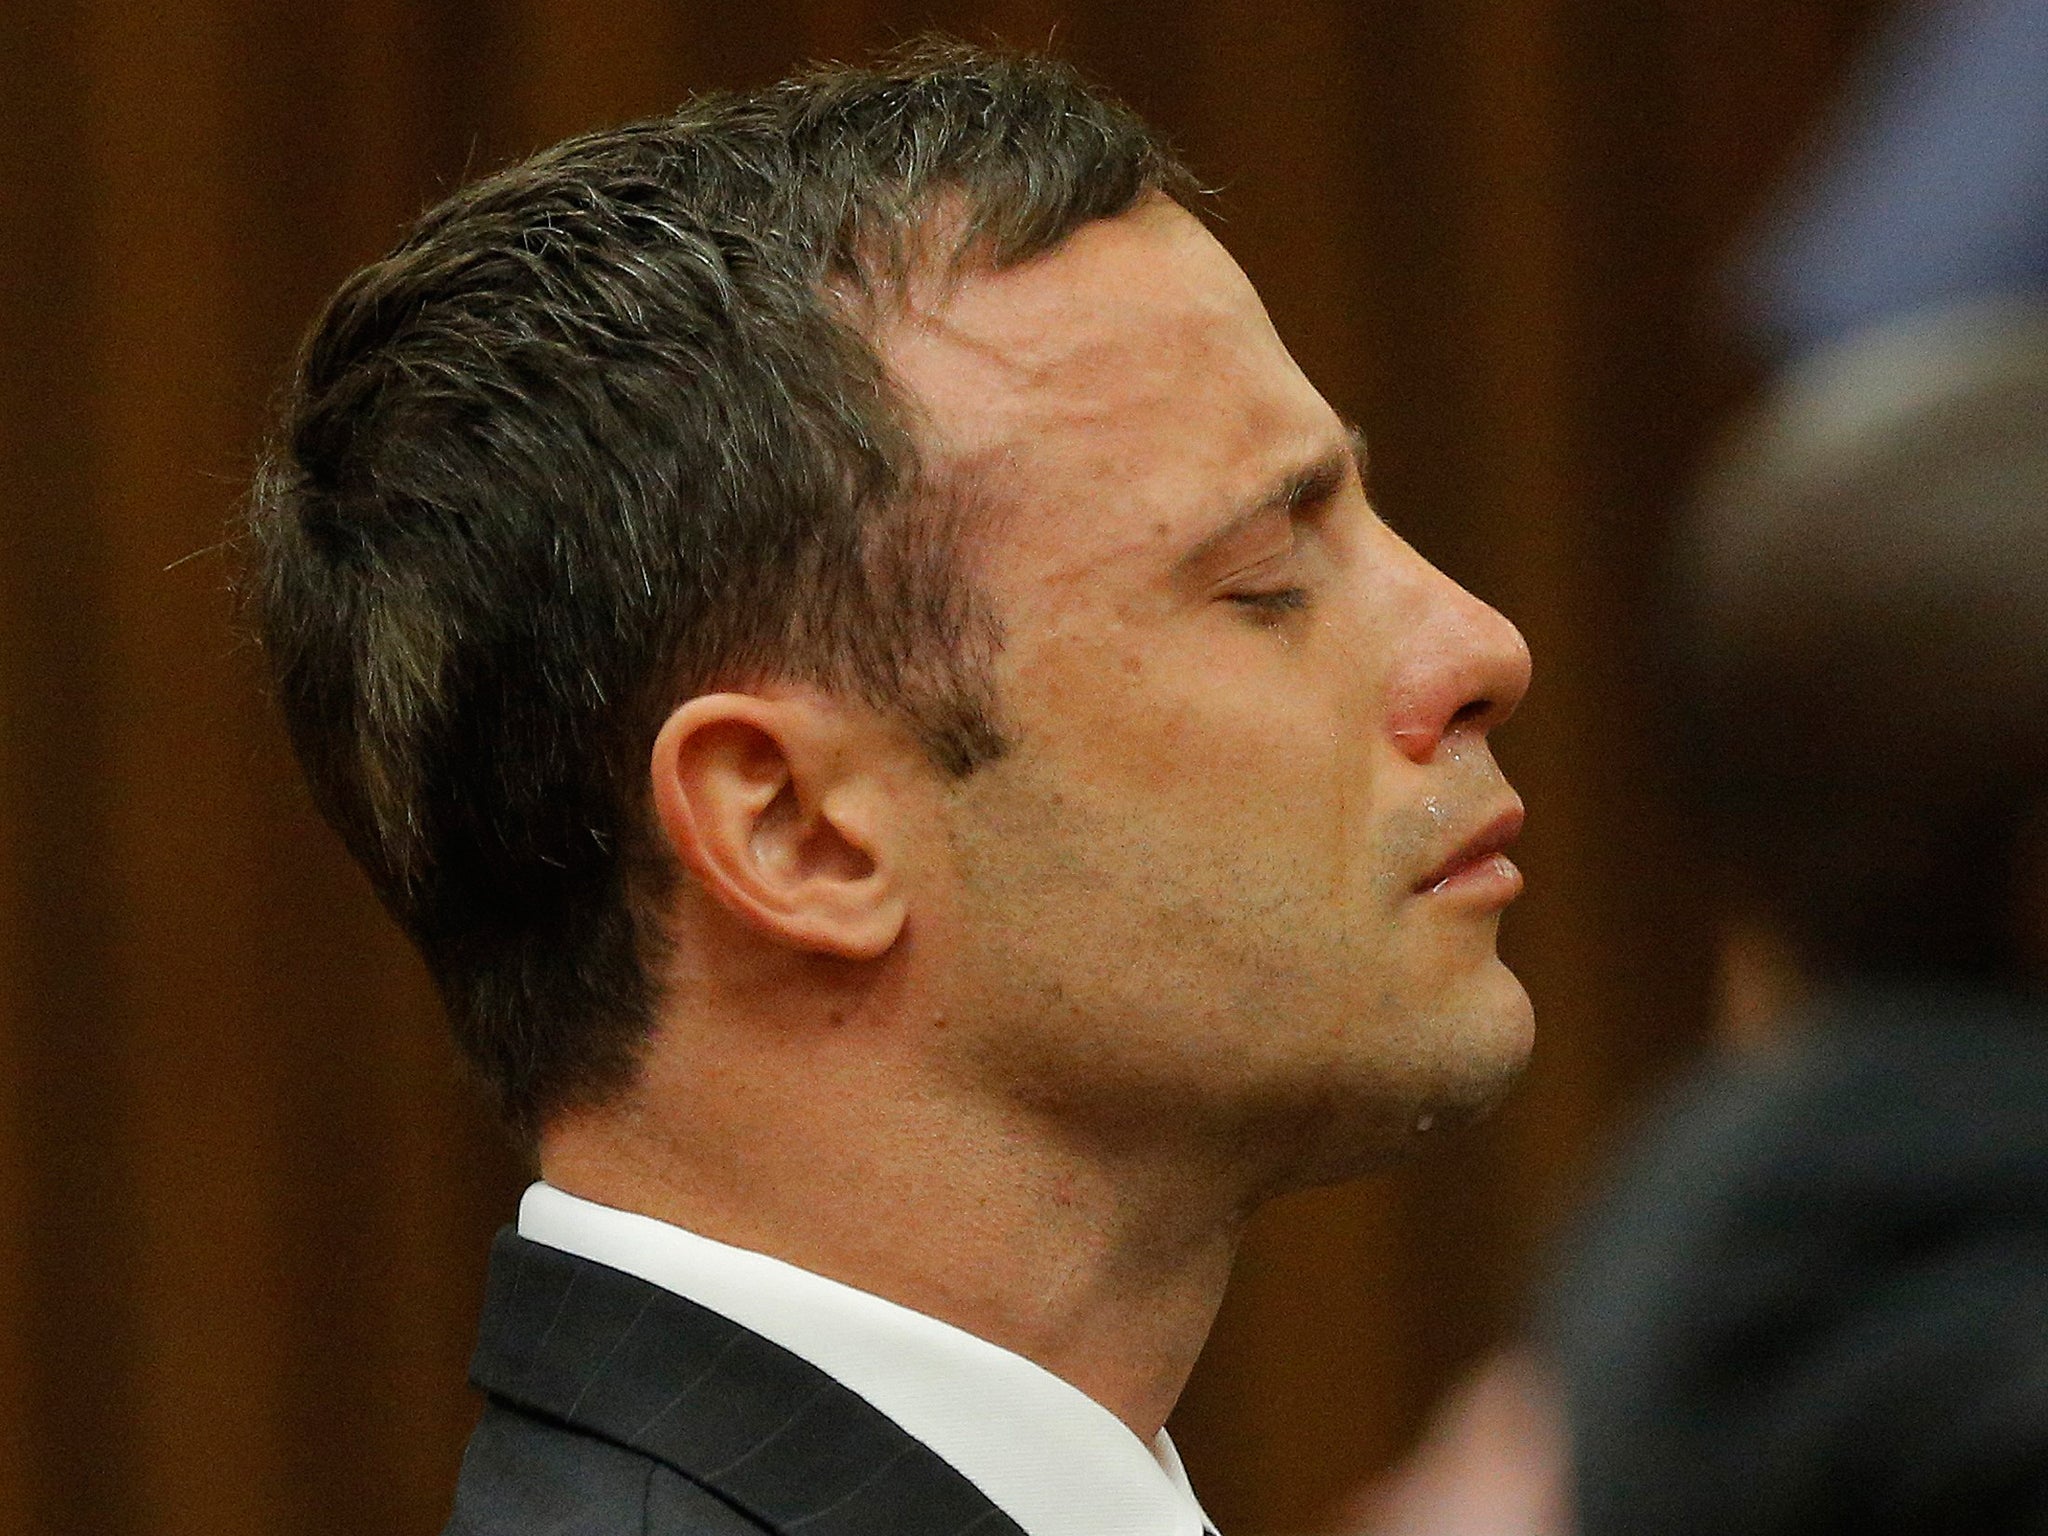 Oscar Pistorius reacts as he listens to Judge Thokozile Masipa's judgement at the North Gauteng High Court in Pretoria